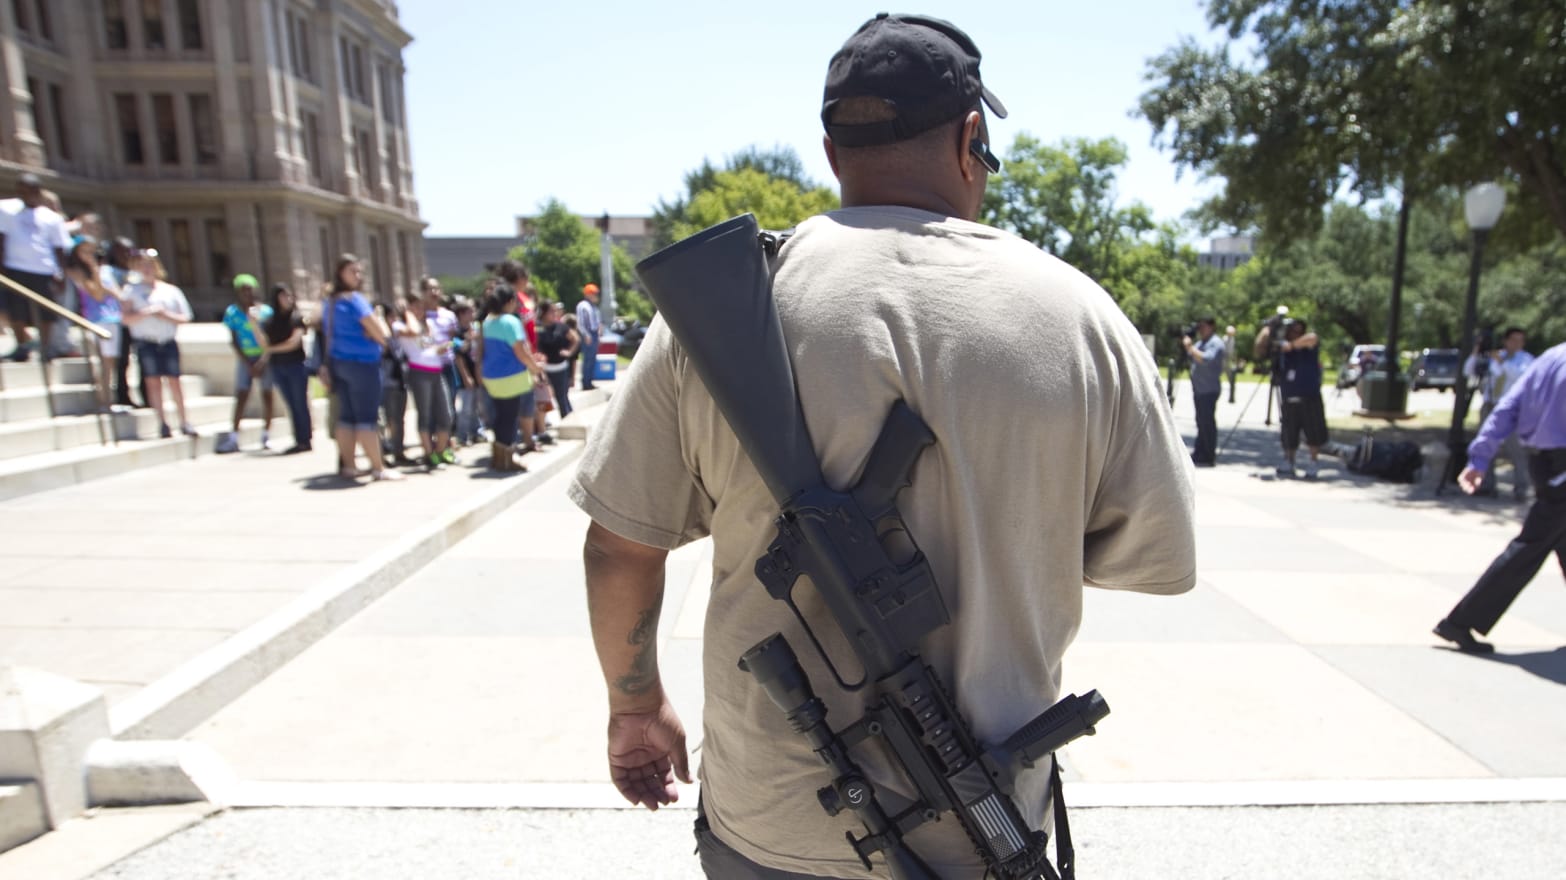 IV. Debating the Ethics of Open Carry vs. Concealed Carry